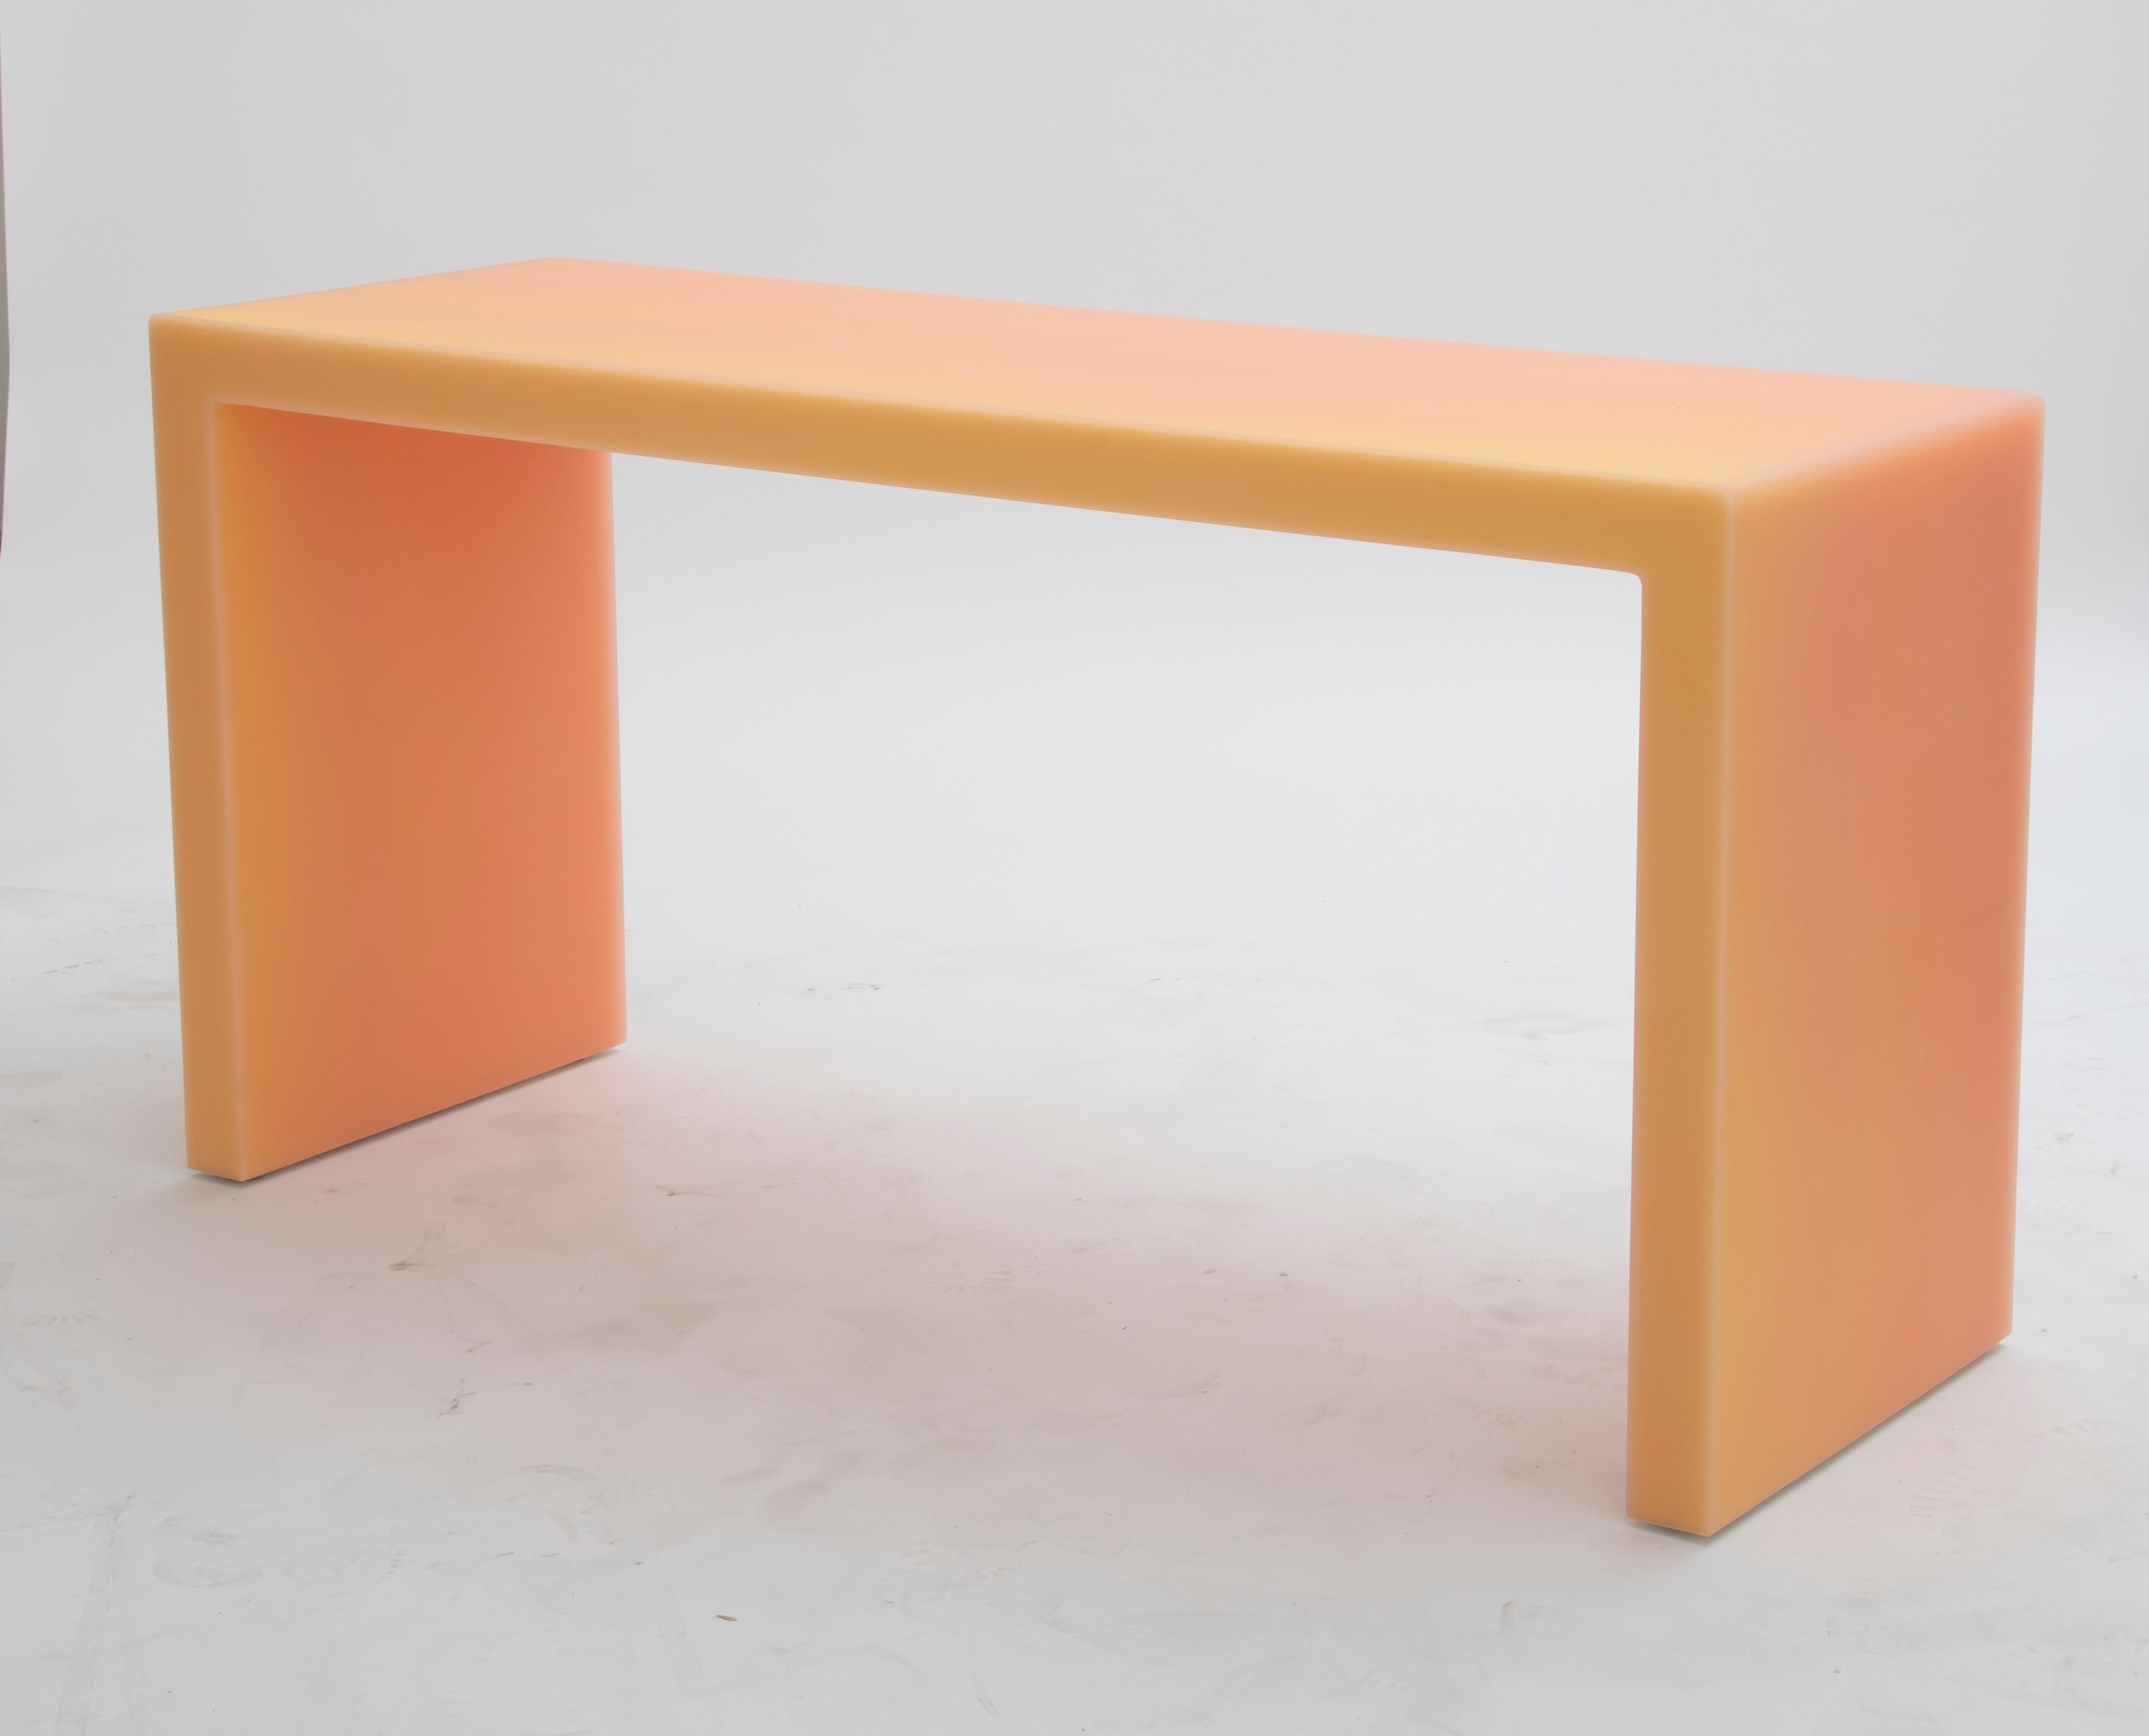 The resin desk features a matte exterior in a warm hue, attracting the eyes with shifting saturation in wavy patterns. This desk creates the illusion of perpetual motion in different directions depending on where the observer is.